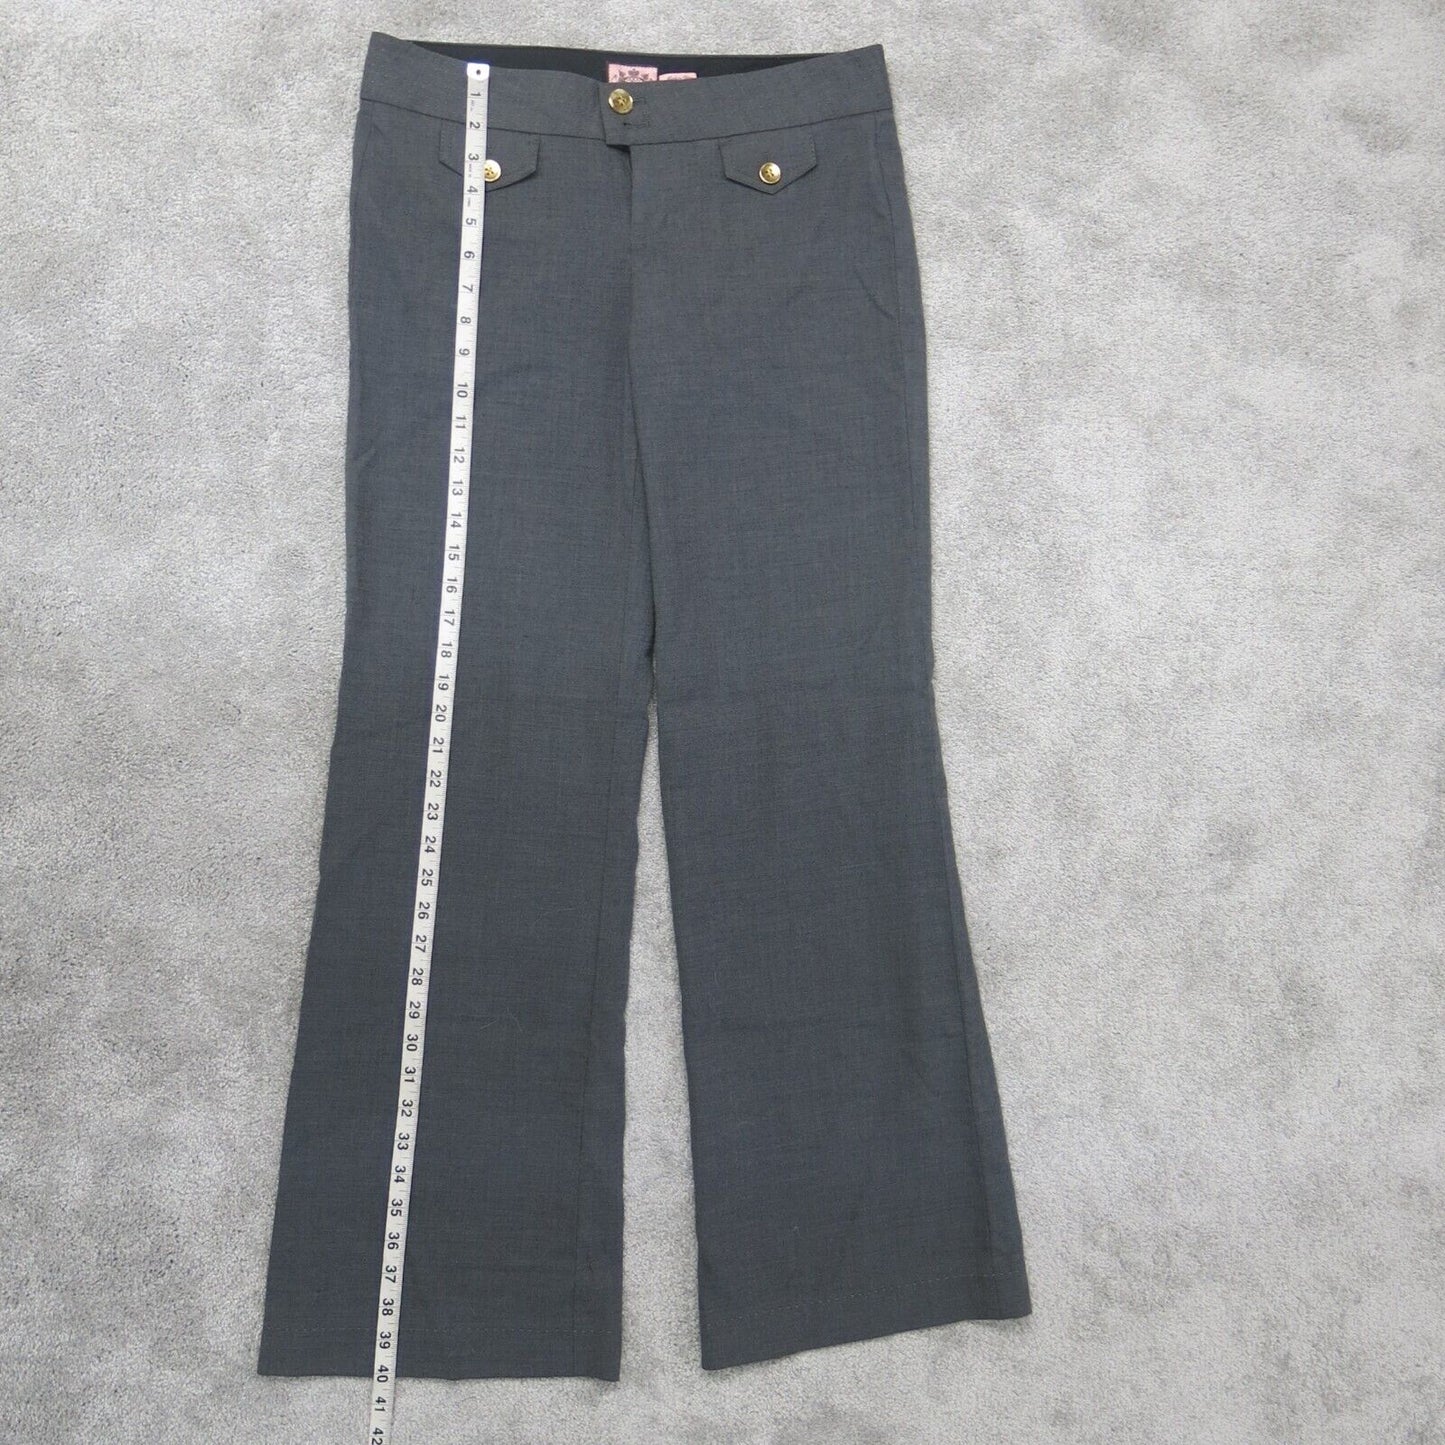 Juicy Couture Womens Flared Leg Pant Mid Rise Pockets Heather Gray Size 6